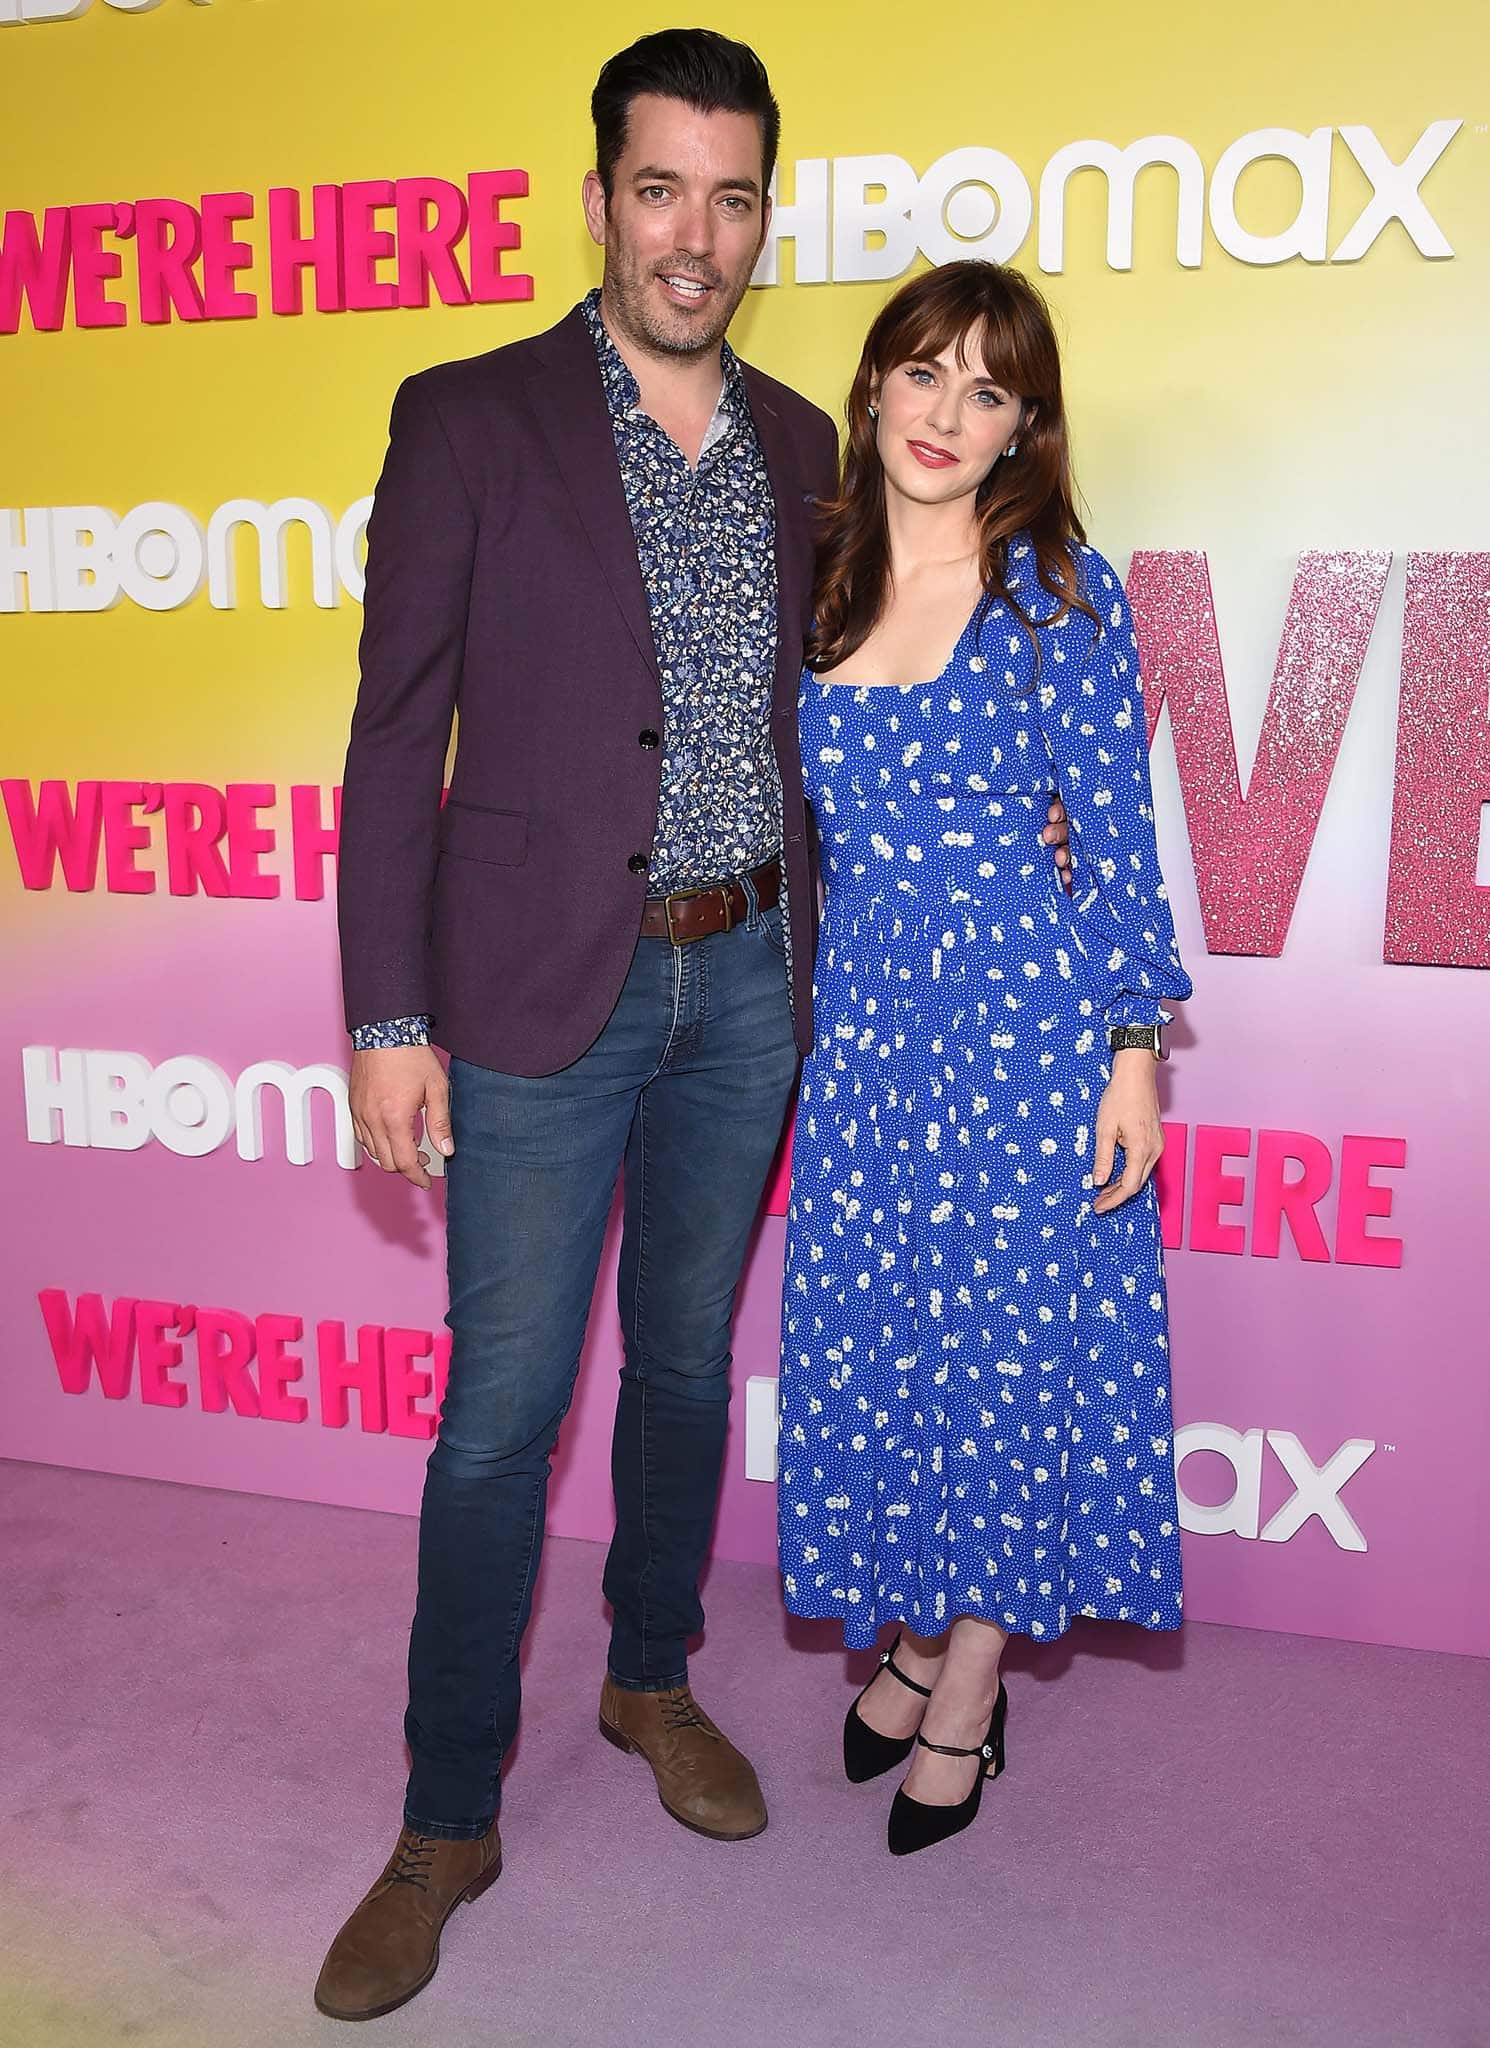 Jonathan Scott and Zooey Deschanel at the We're Here LA premiere at the Sony Studios in Culver City on October 8, 2021